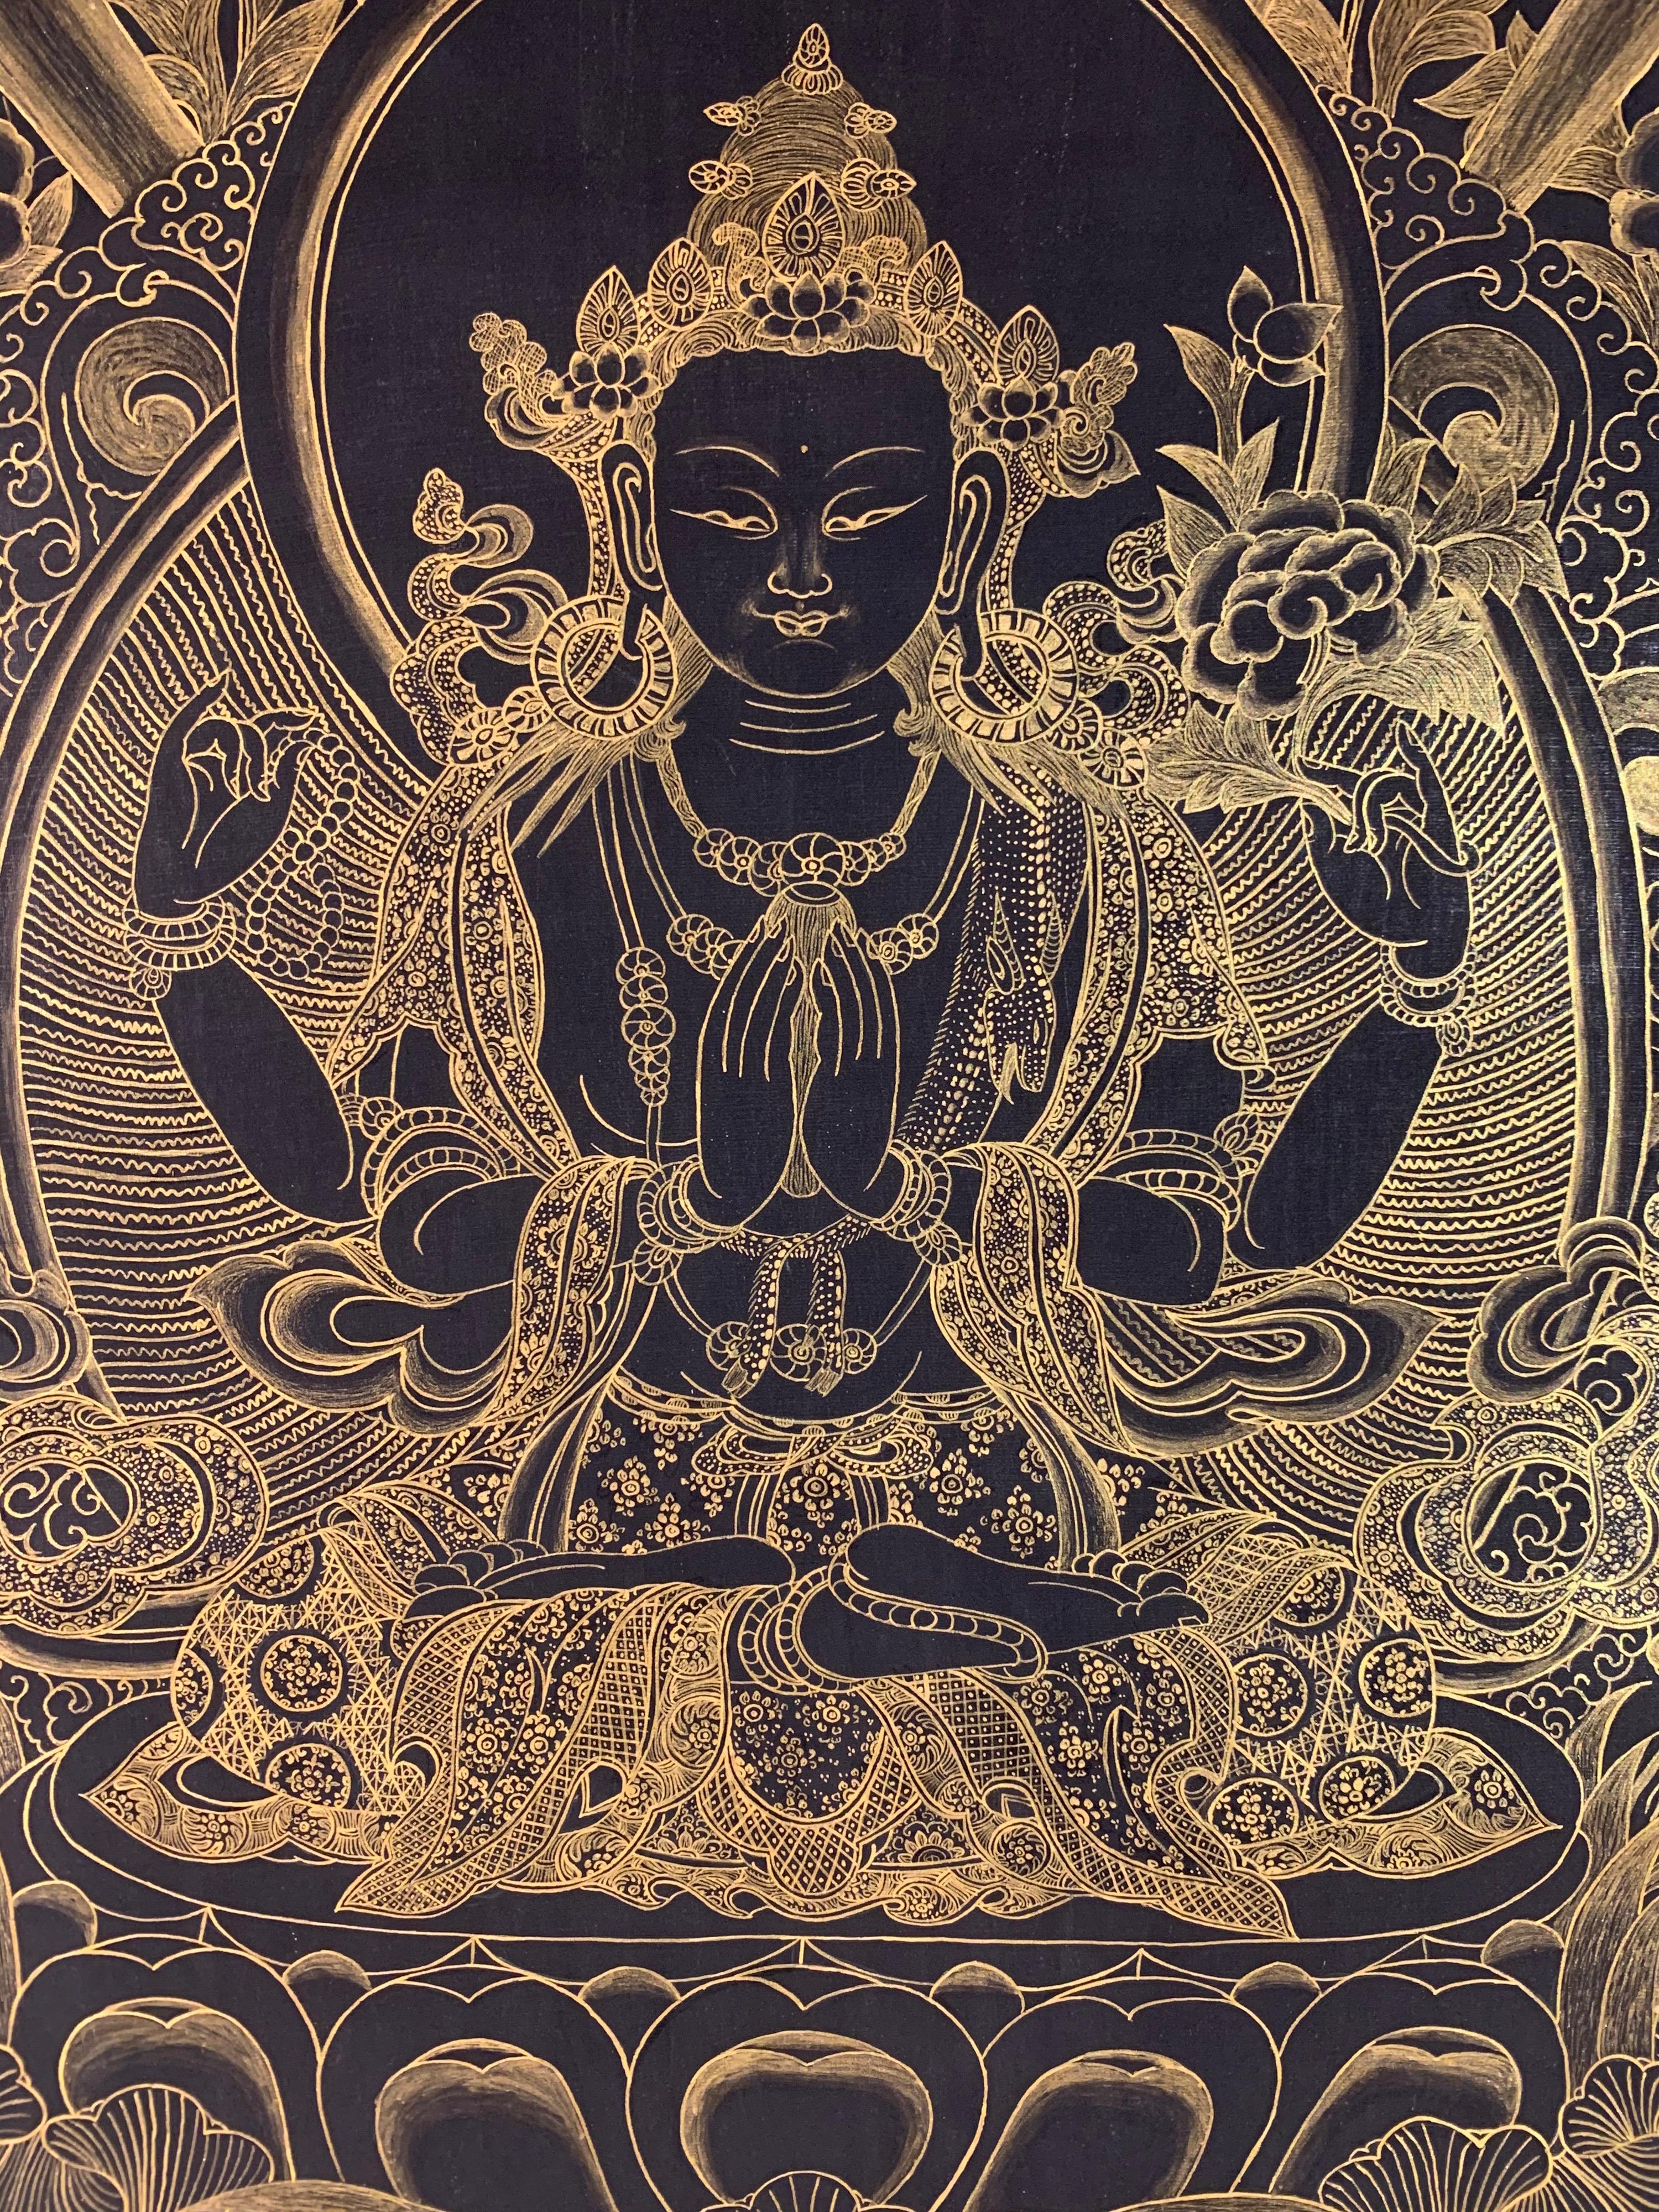 Unframed Hand Painted Chenrezig Thangka on Canvas with 24K Gold  For Sale 4